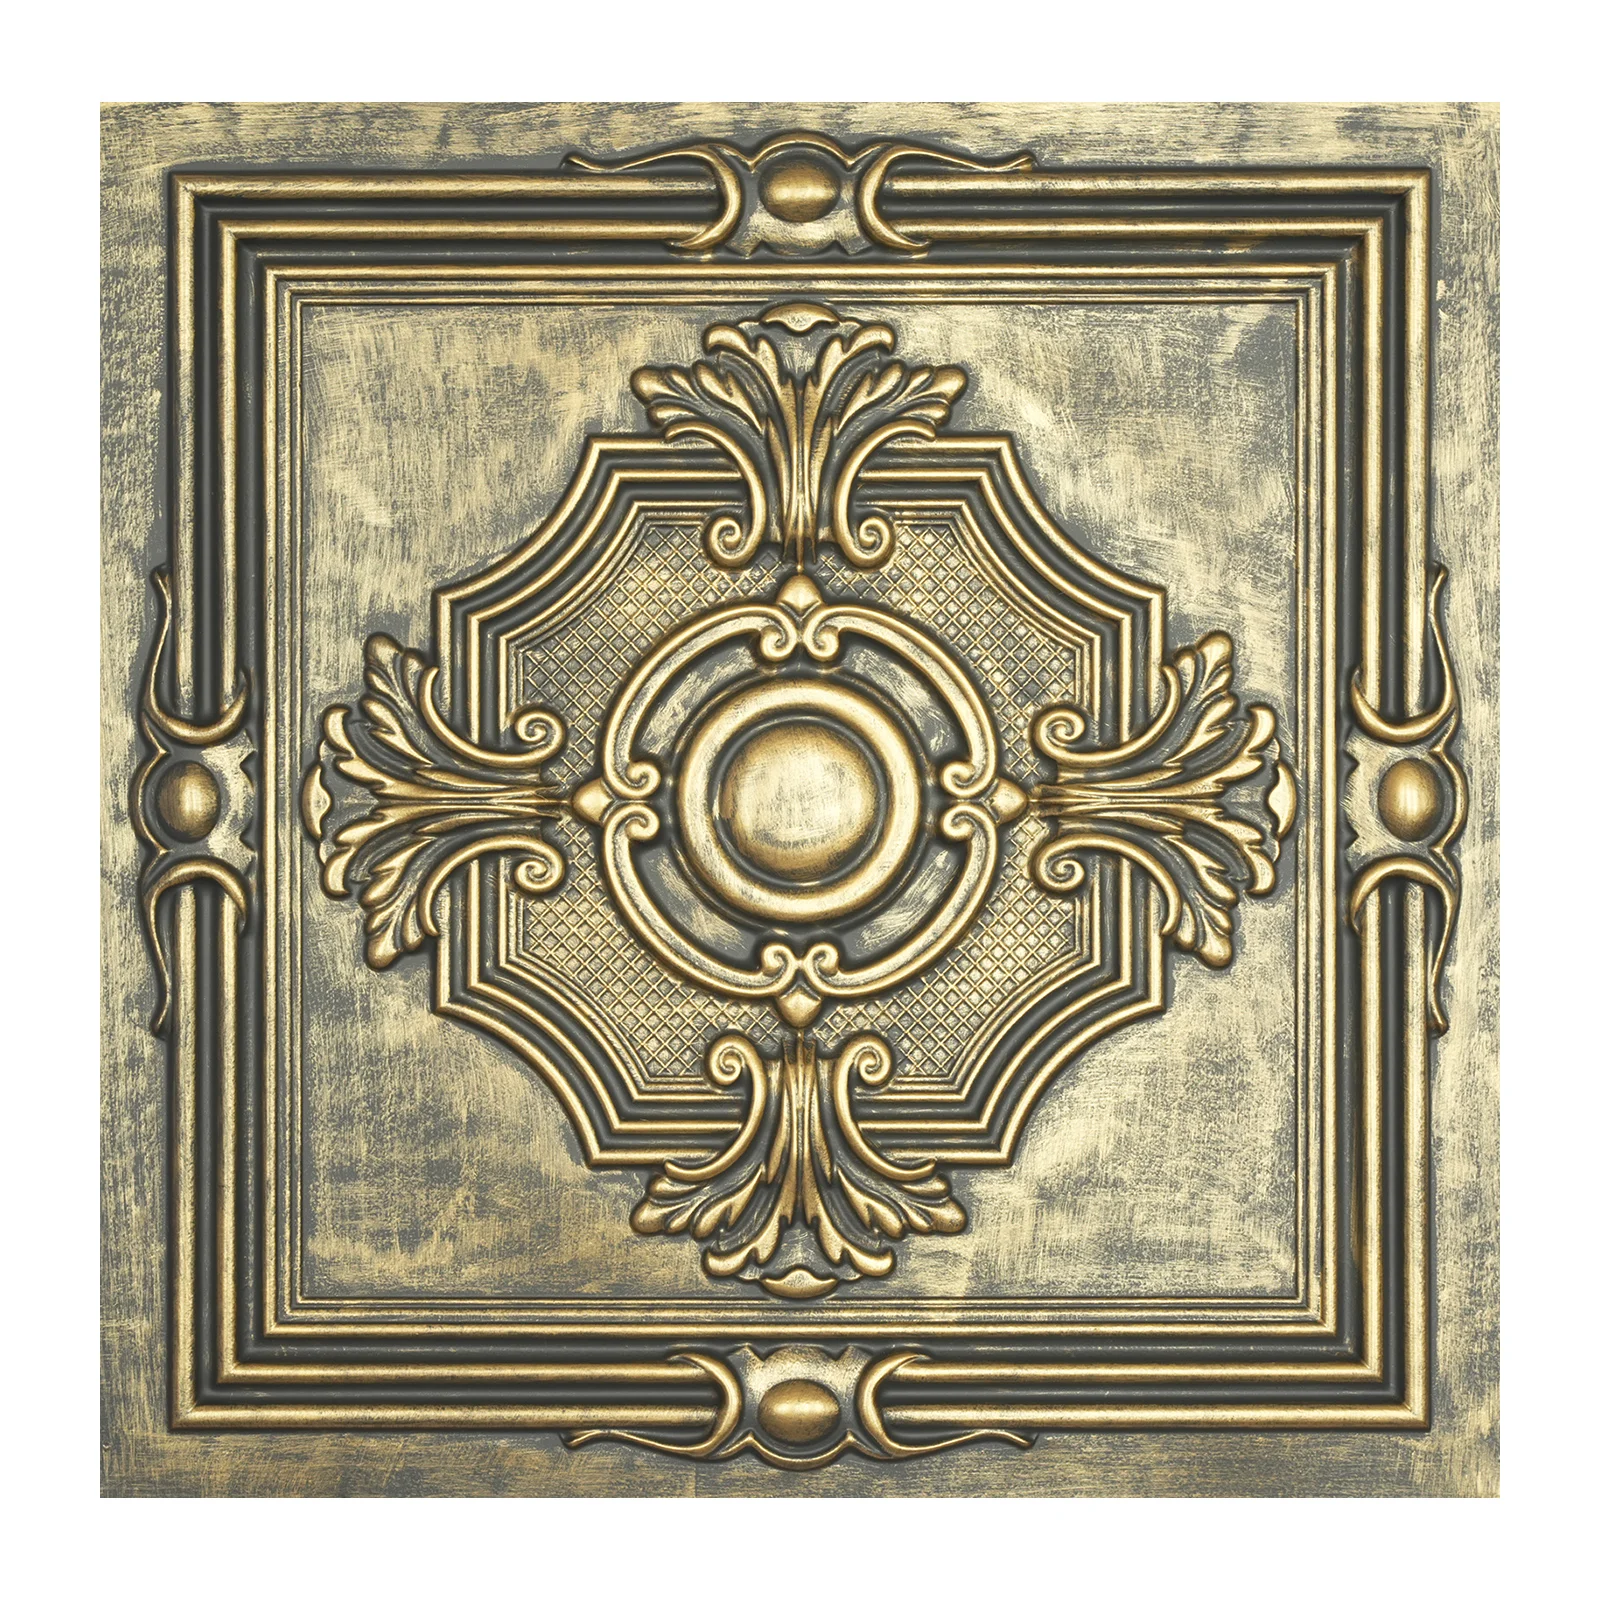 Distressed Art deco style ceiling tiles faux tin painted wall panels Easy to Install PVC Panels for Groggery PL38 ancient gold